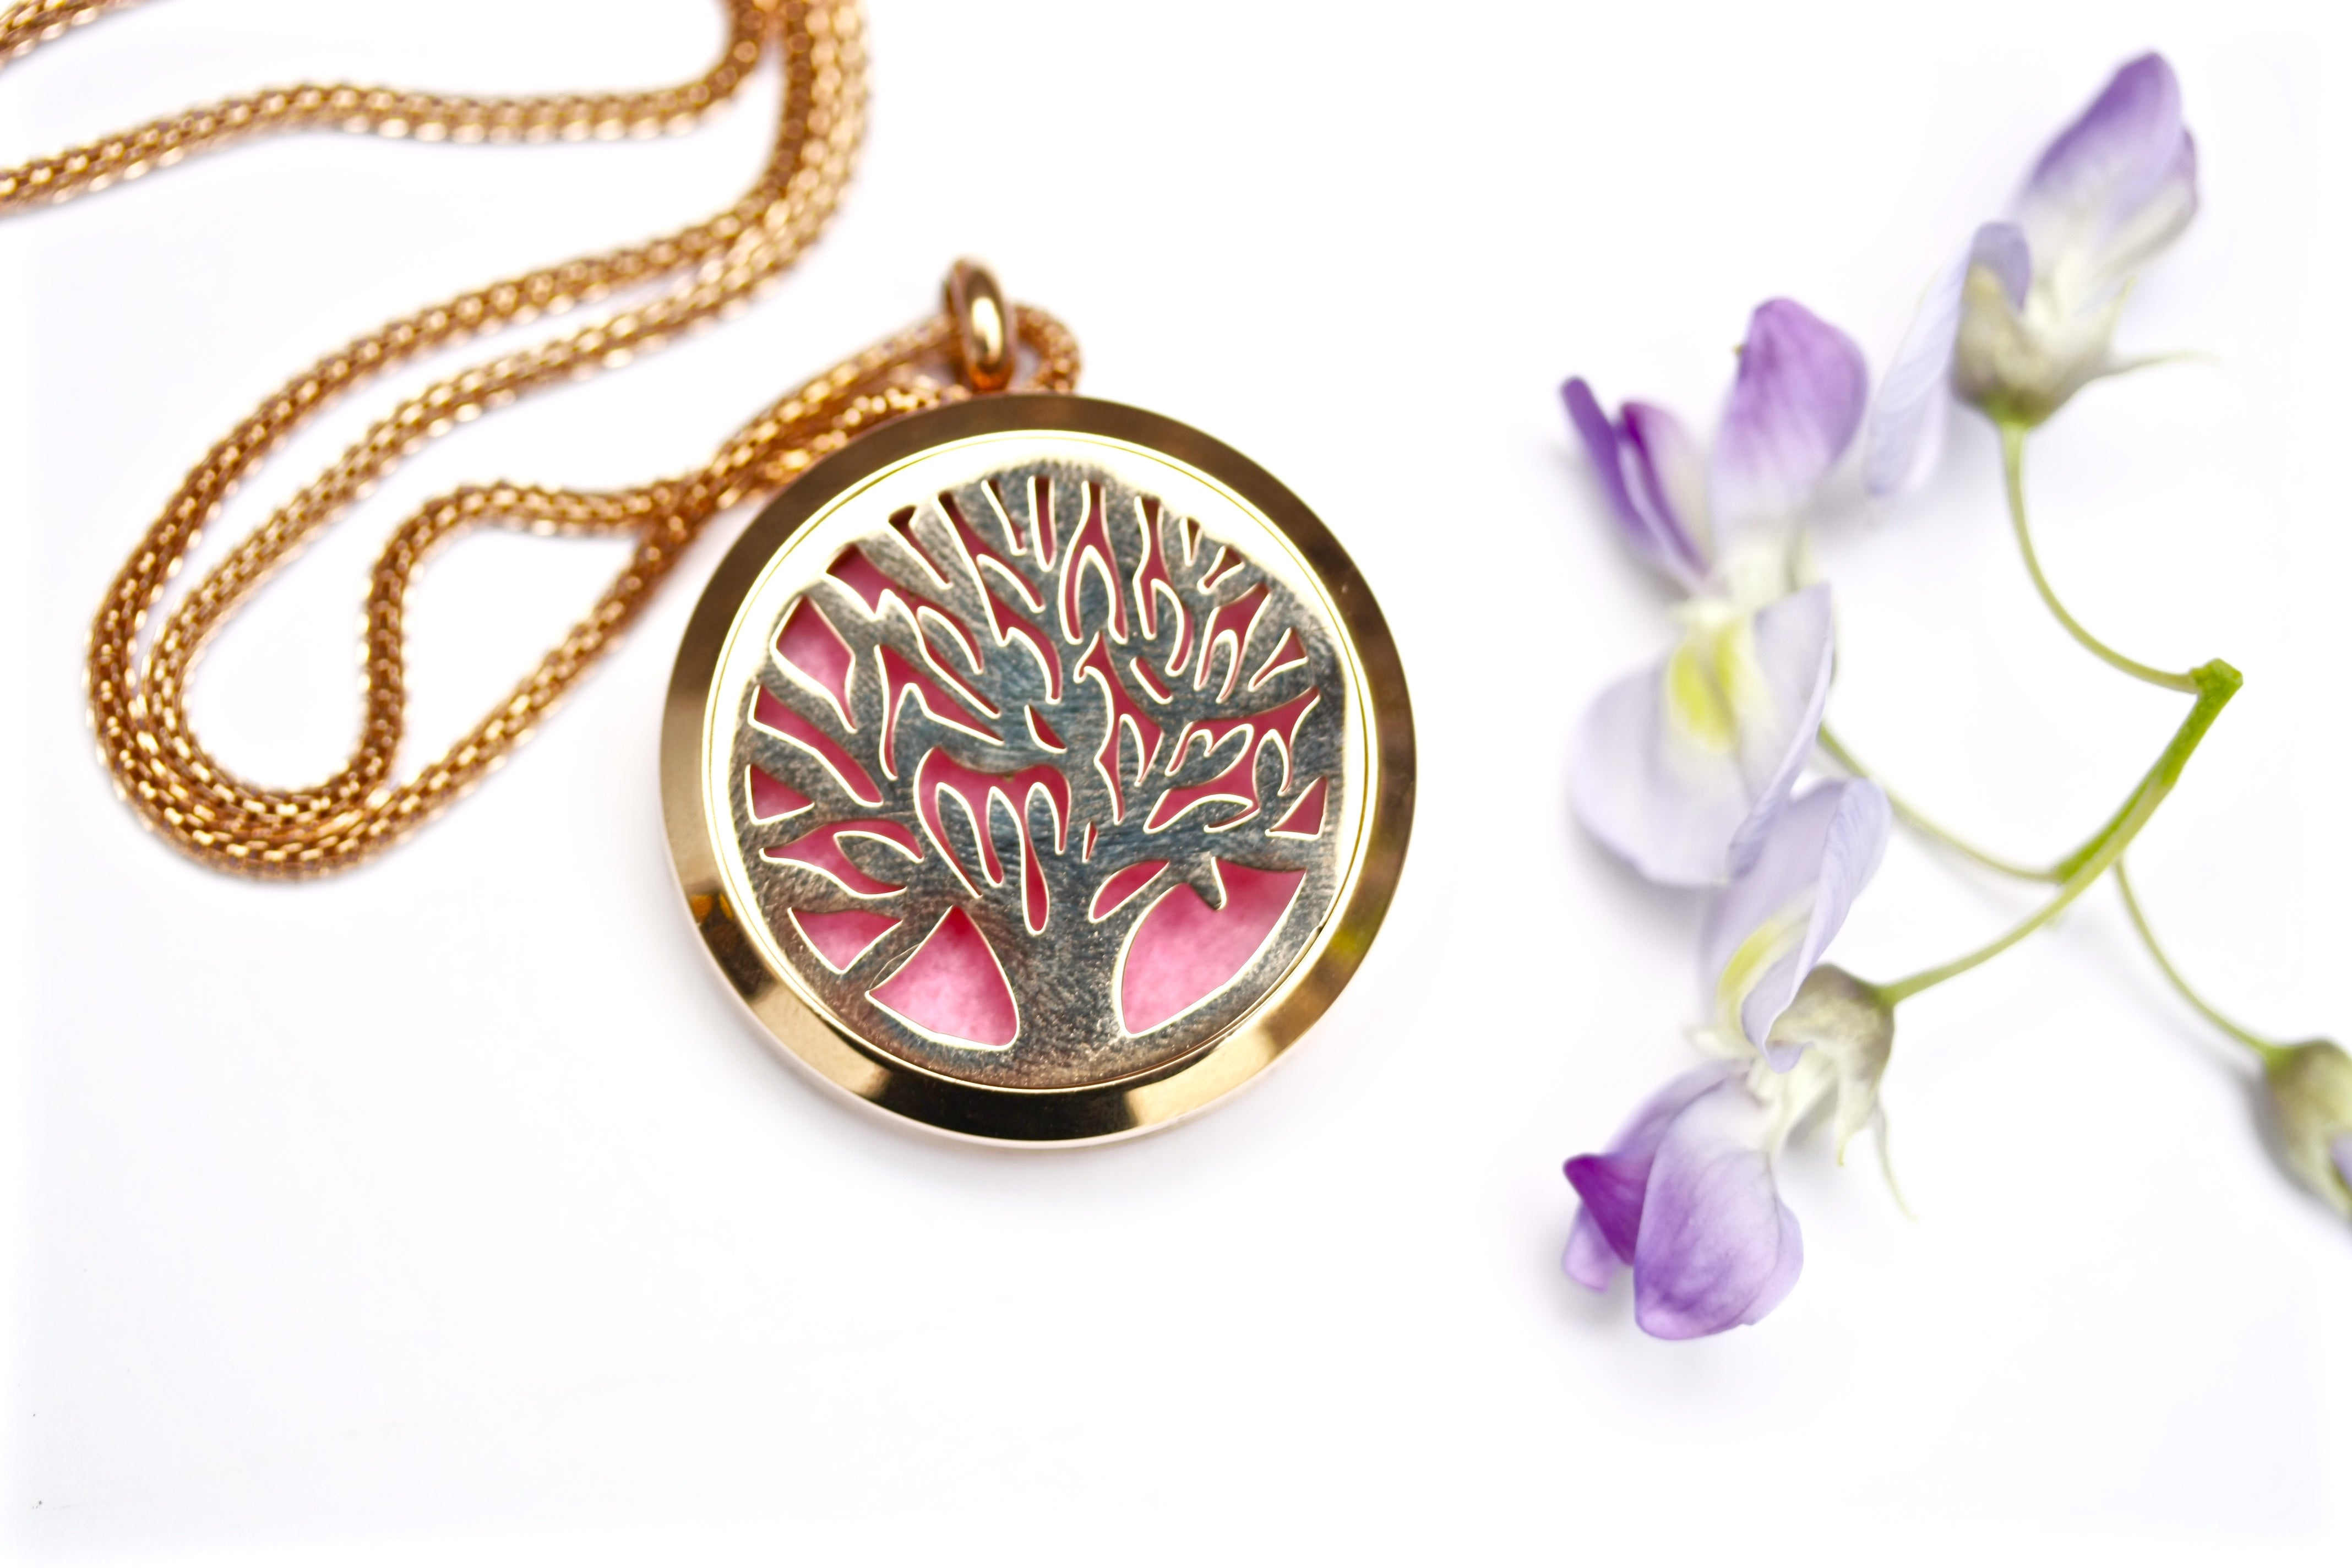 How To Make An Essential Oil Diffuser Necklace